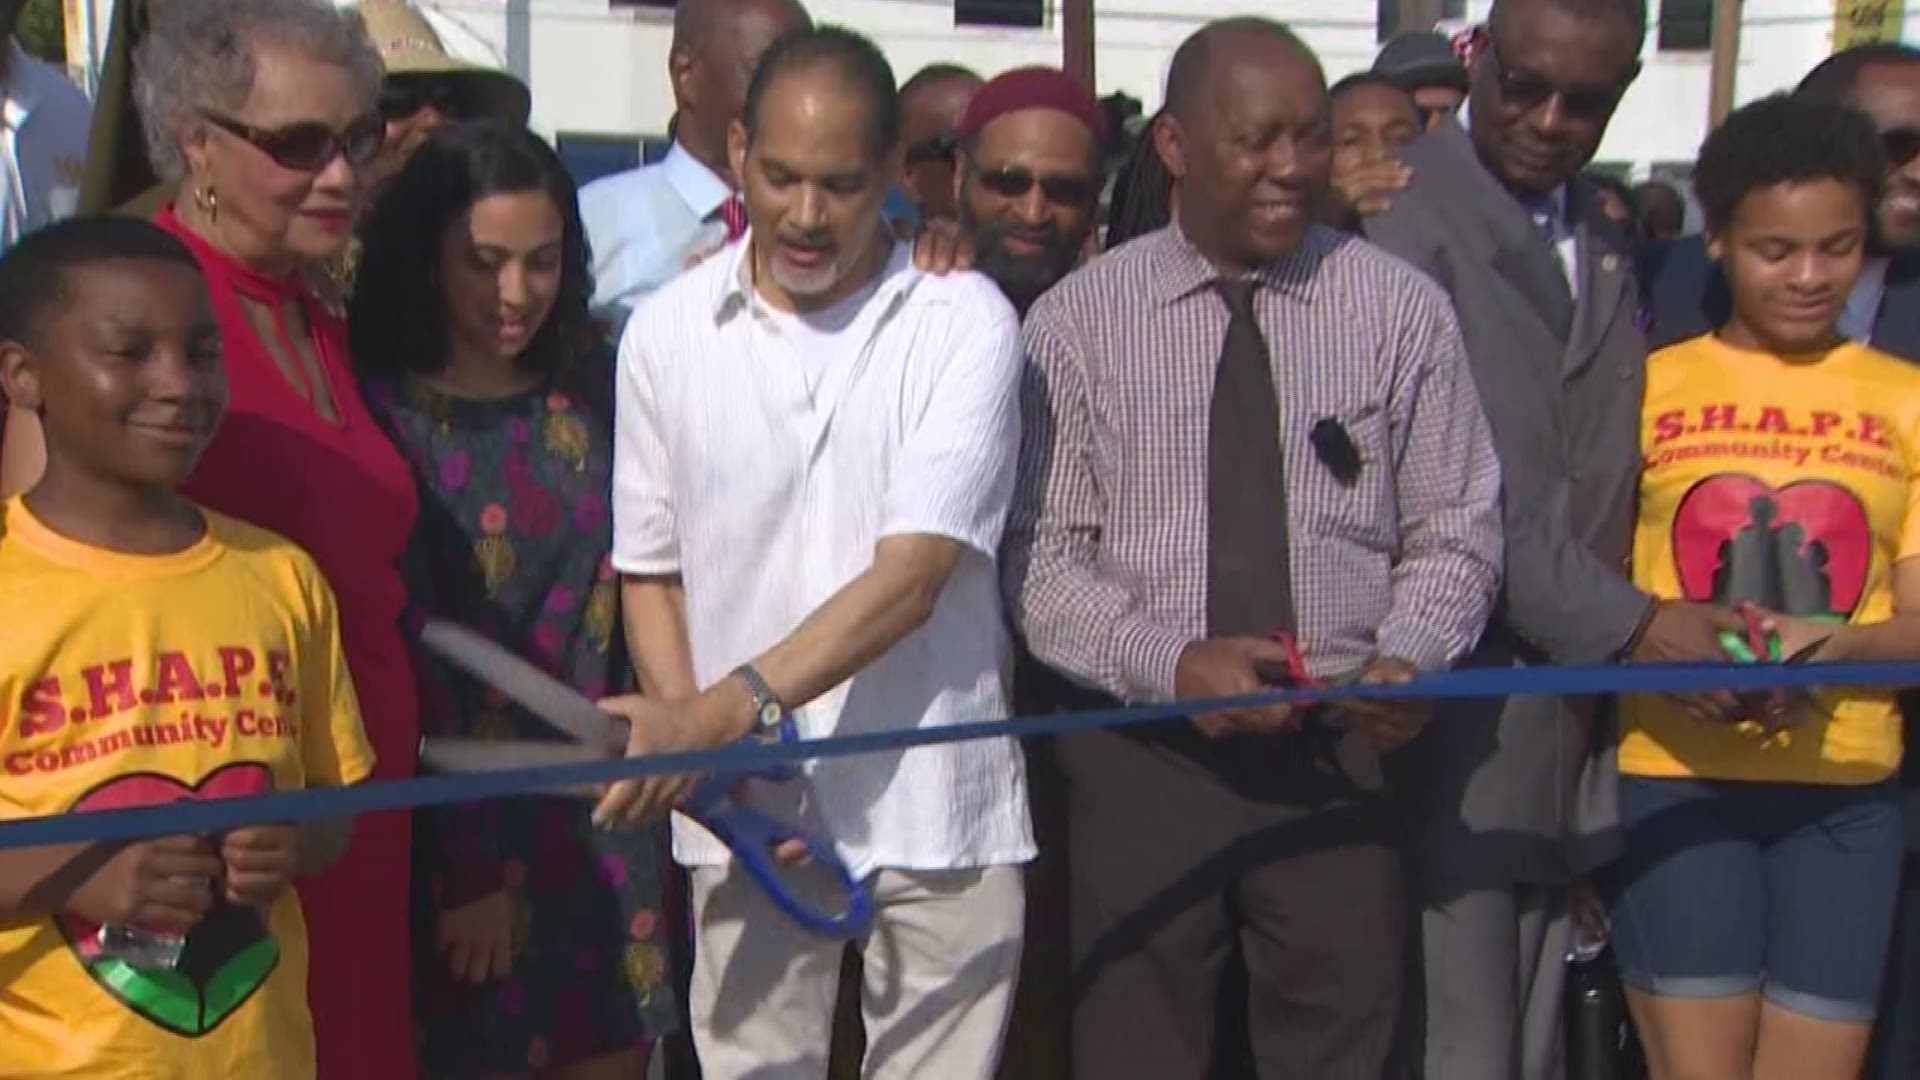 A street in Houston's Third Ward once named after a confederate leader now has a new name.